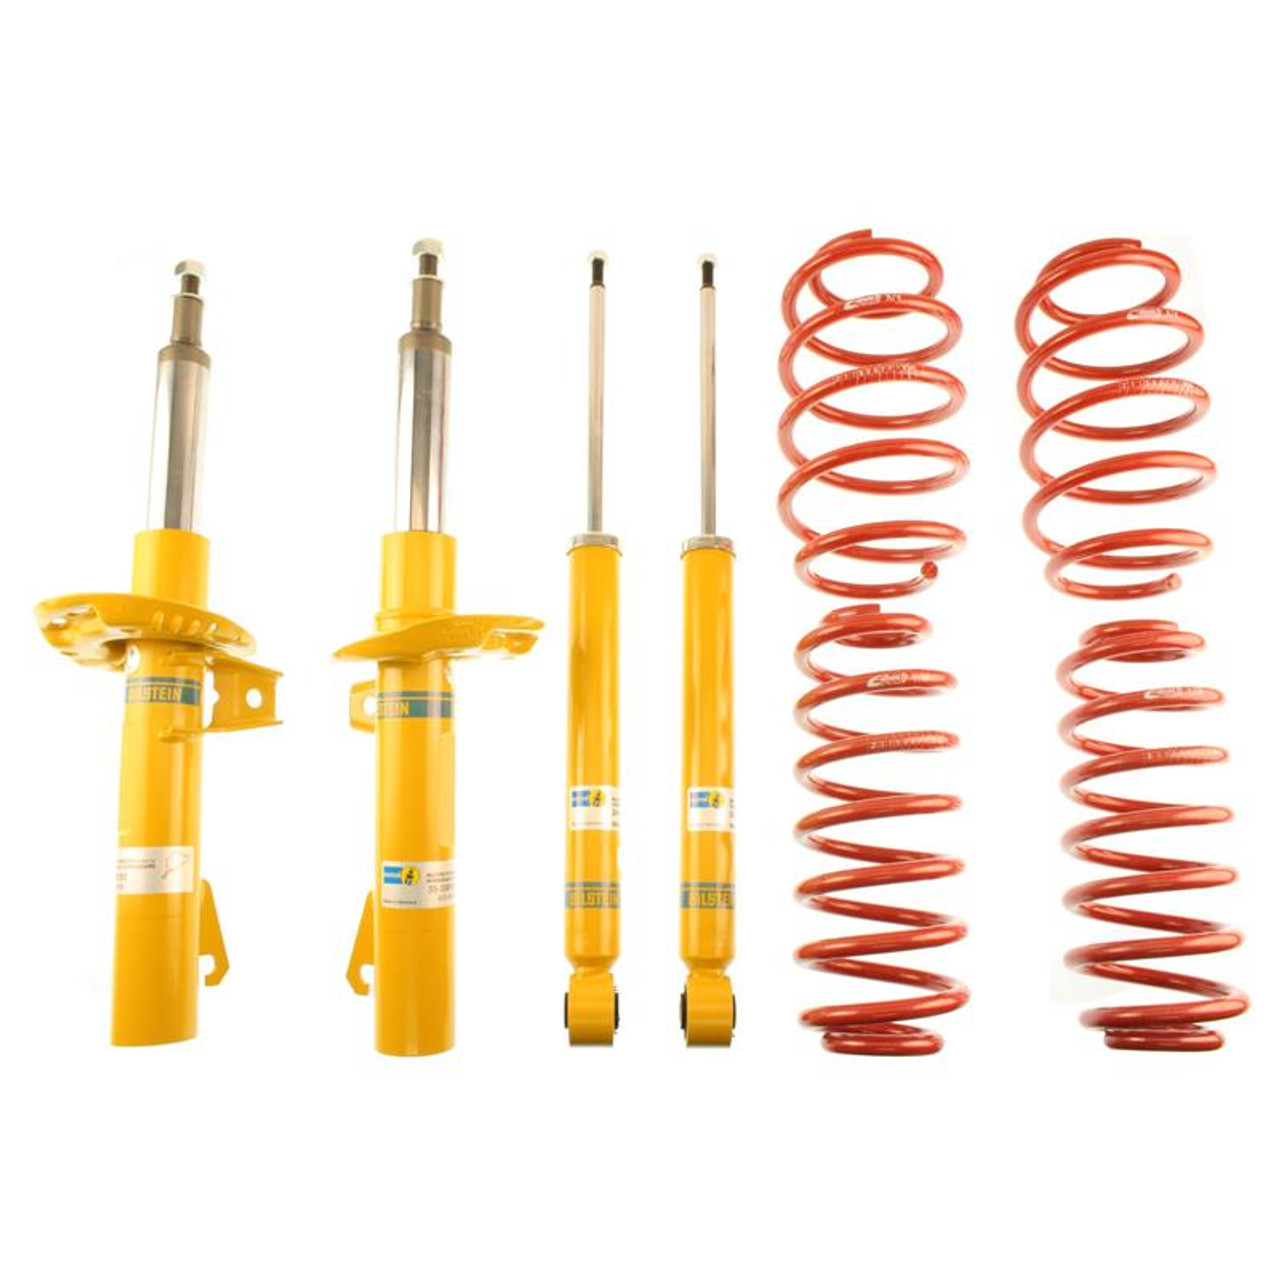 BILSTEIN B12 Pro-Kit: The perfect sports suspension for the BMW E30!